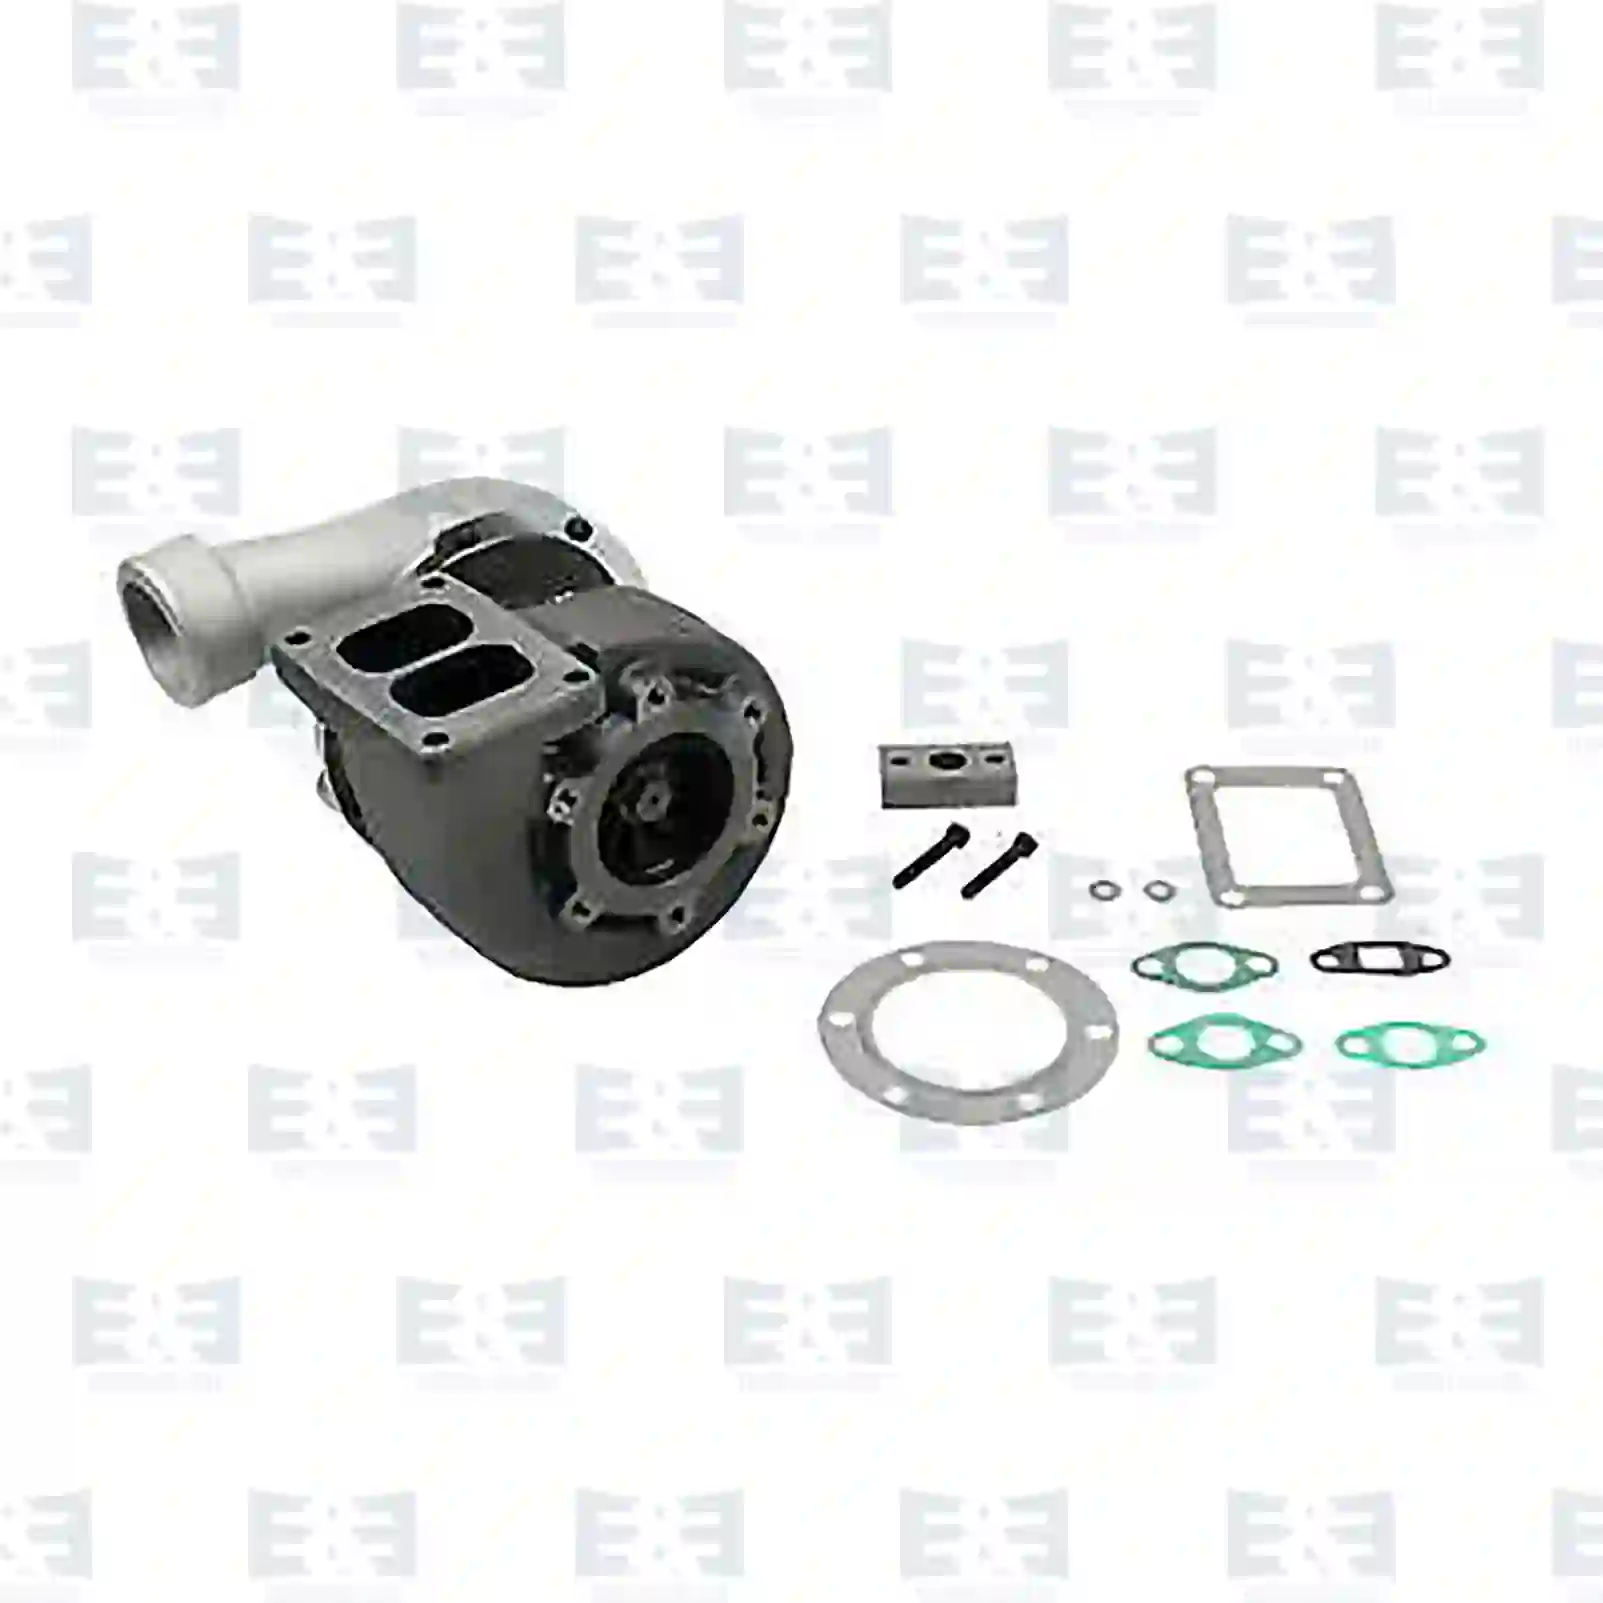 Turbocharger Turbocharger, with gasket kit, EE No 2E2200024 ,  oem no:10570144, 10570150, 10571561, 10571562, 10571596, 10571597, 10571604, 1105169, 1107067, 1107068, 1571561, 1571562, 1571596, 1571597, 1571604, 282865, 305762, 320037, 320038, 322668, 366801, 523206, 523262, 525222, 570144, 570150, 571561, 571562, 571596, 571597, 571604 E&E Truck Spare Parts | Truck Spare Parts, Auotomotive Spare Parts